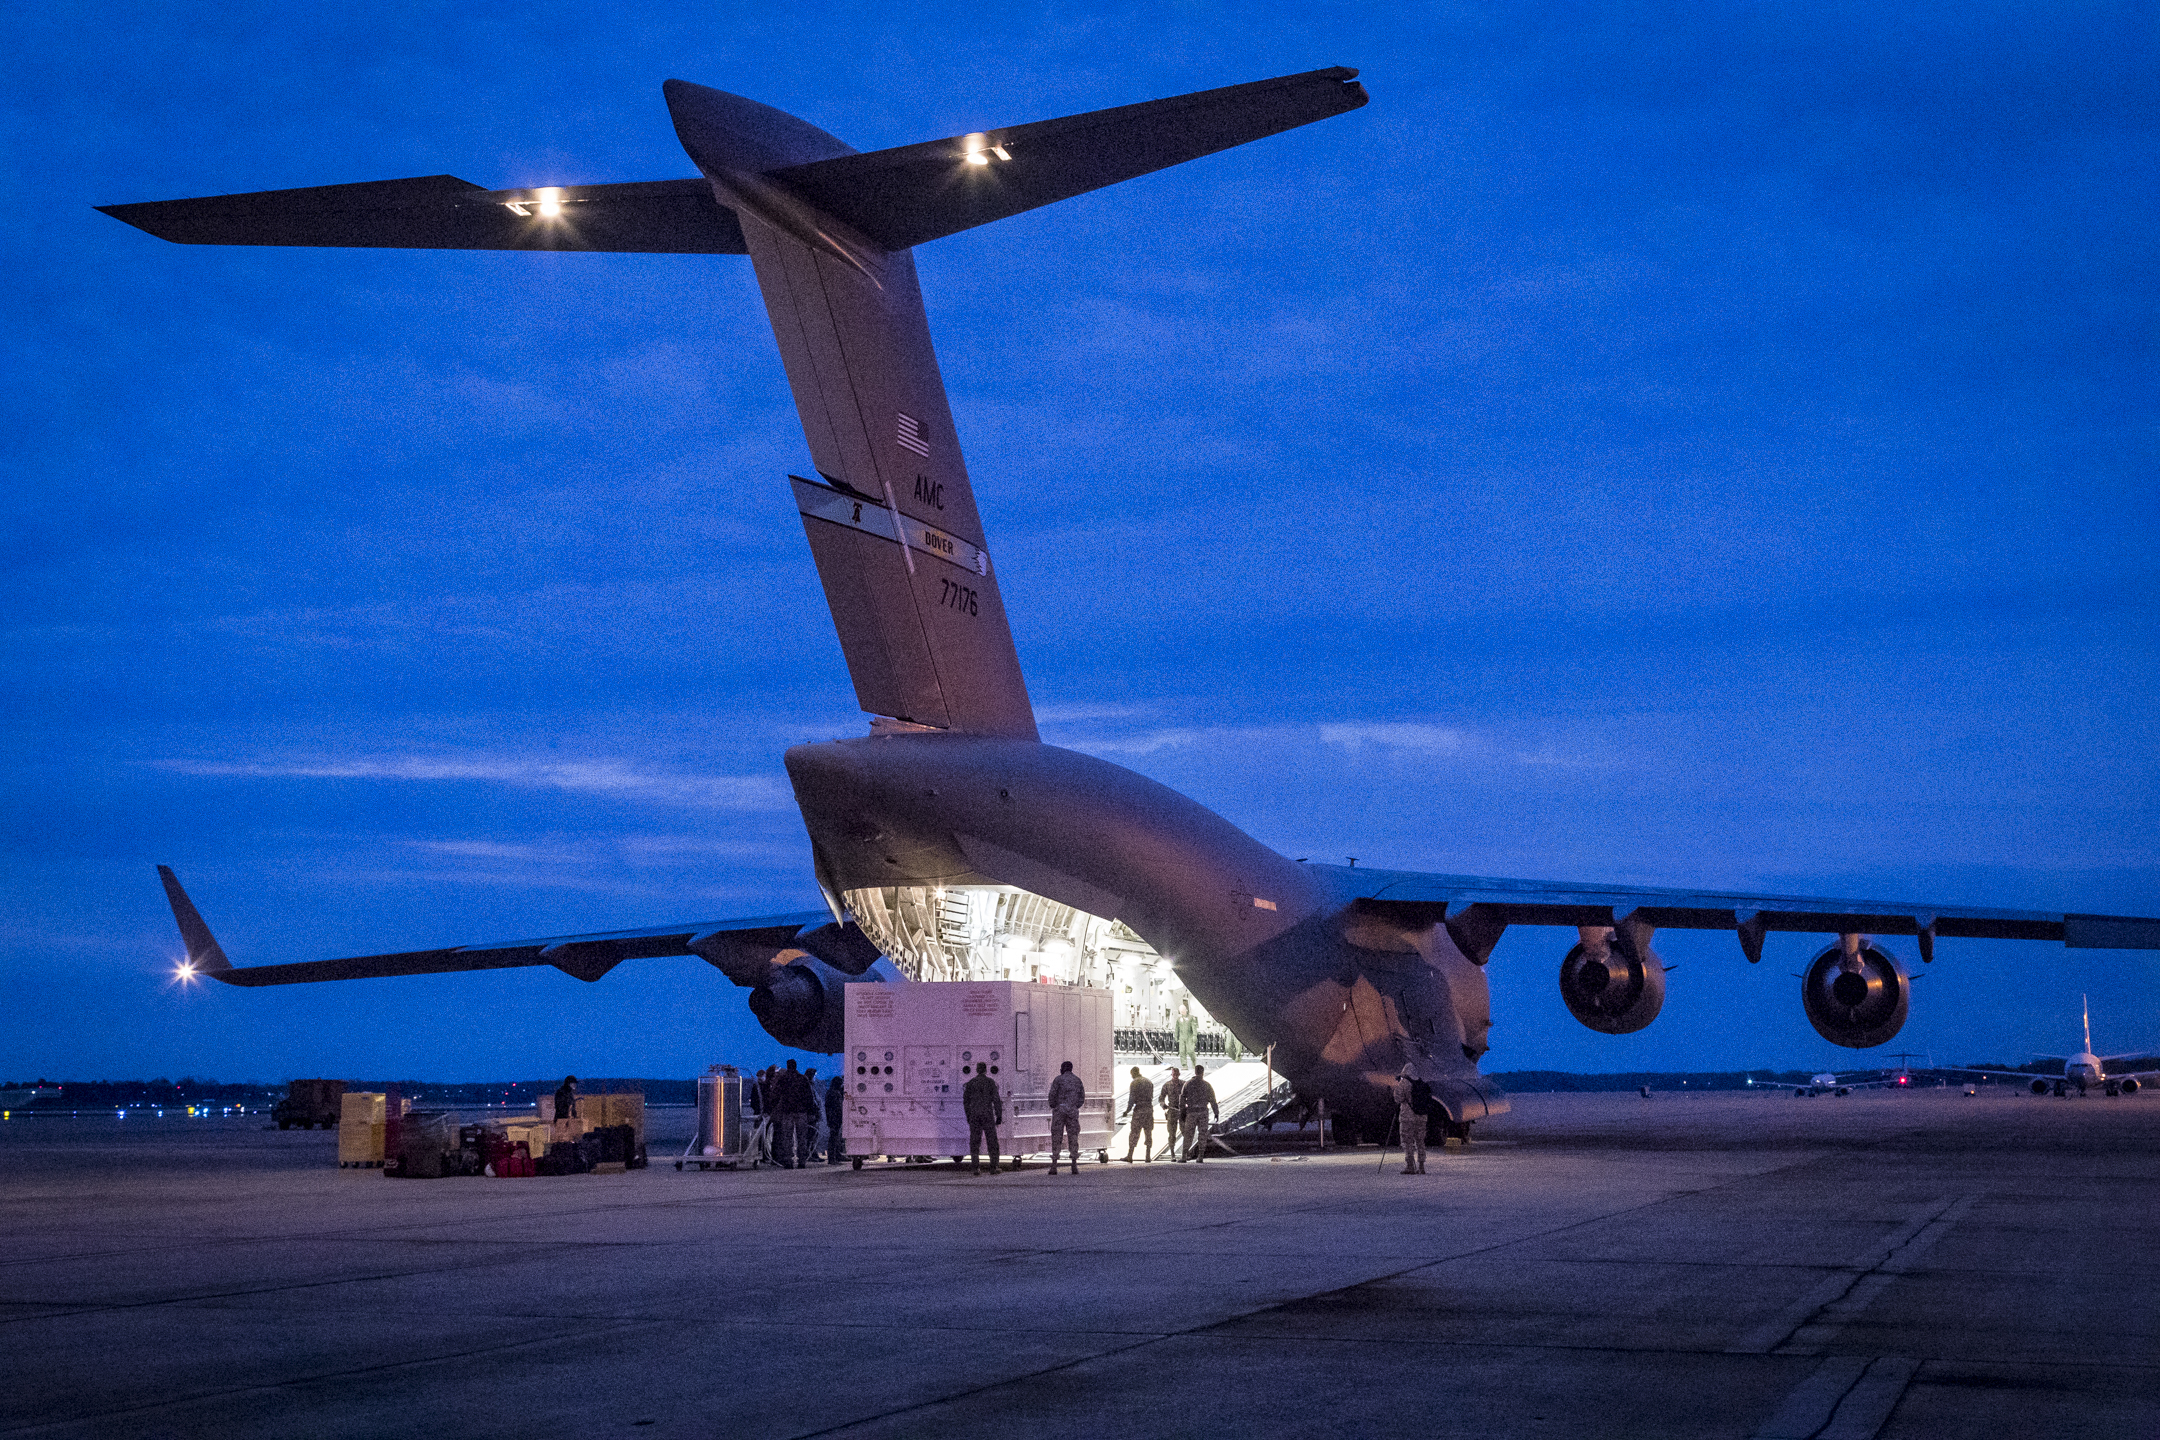 Inside its protective shipping container, NASA’s Parker Solar Probe is loaded into a C-17 from the United States Air Force’s 436th Airlift Wing at Joint Base Andrews in Maryland in the early morning of April 3, 2018. From Joint Base Andrews, the spacecraft was flown to Titusville, Florida, where it was taken to Astrotech Space Operations for pre-launch testing and preparations. 